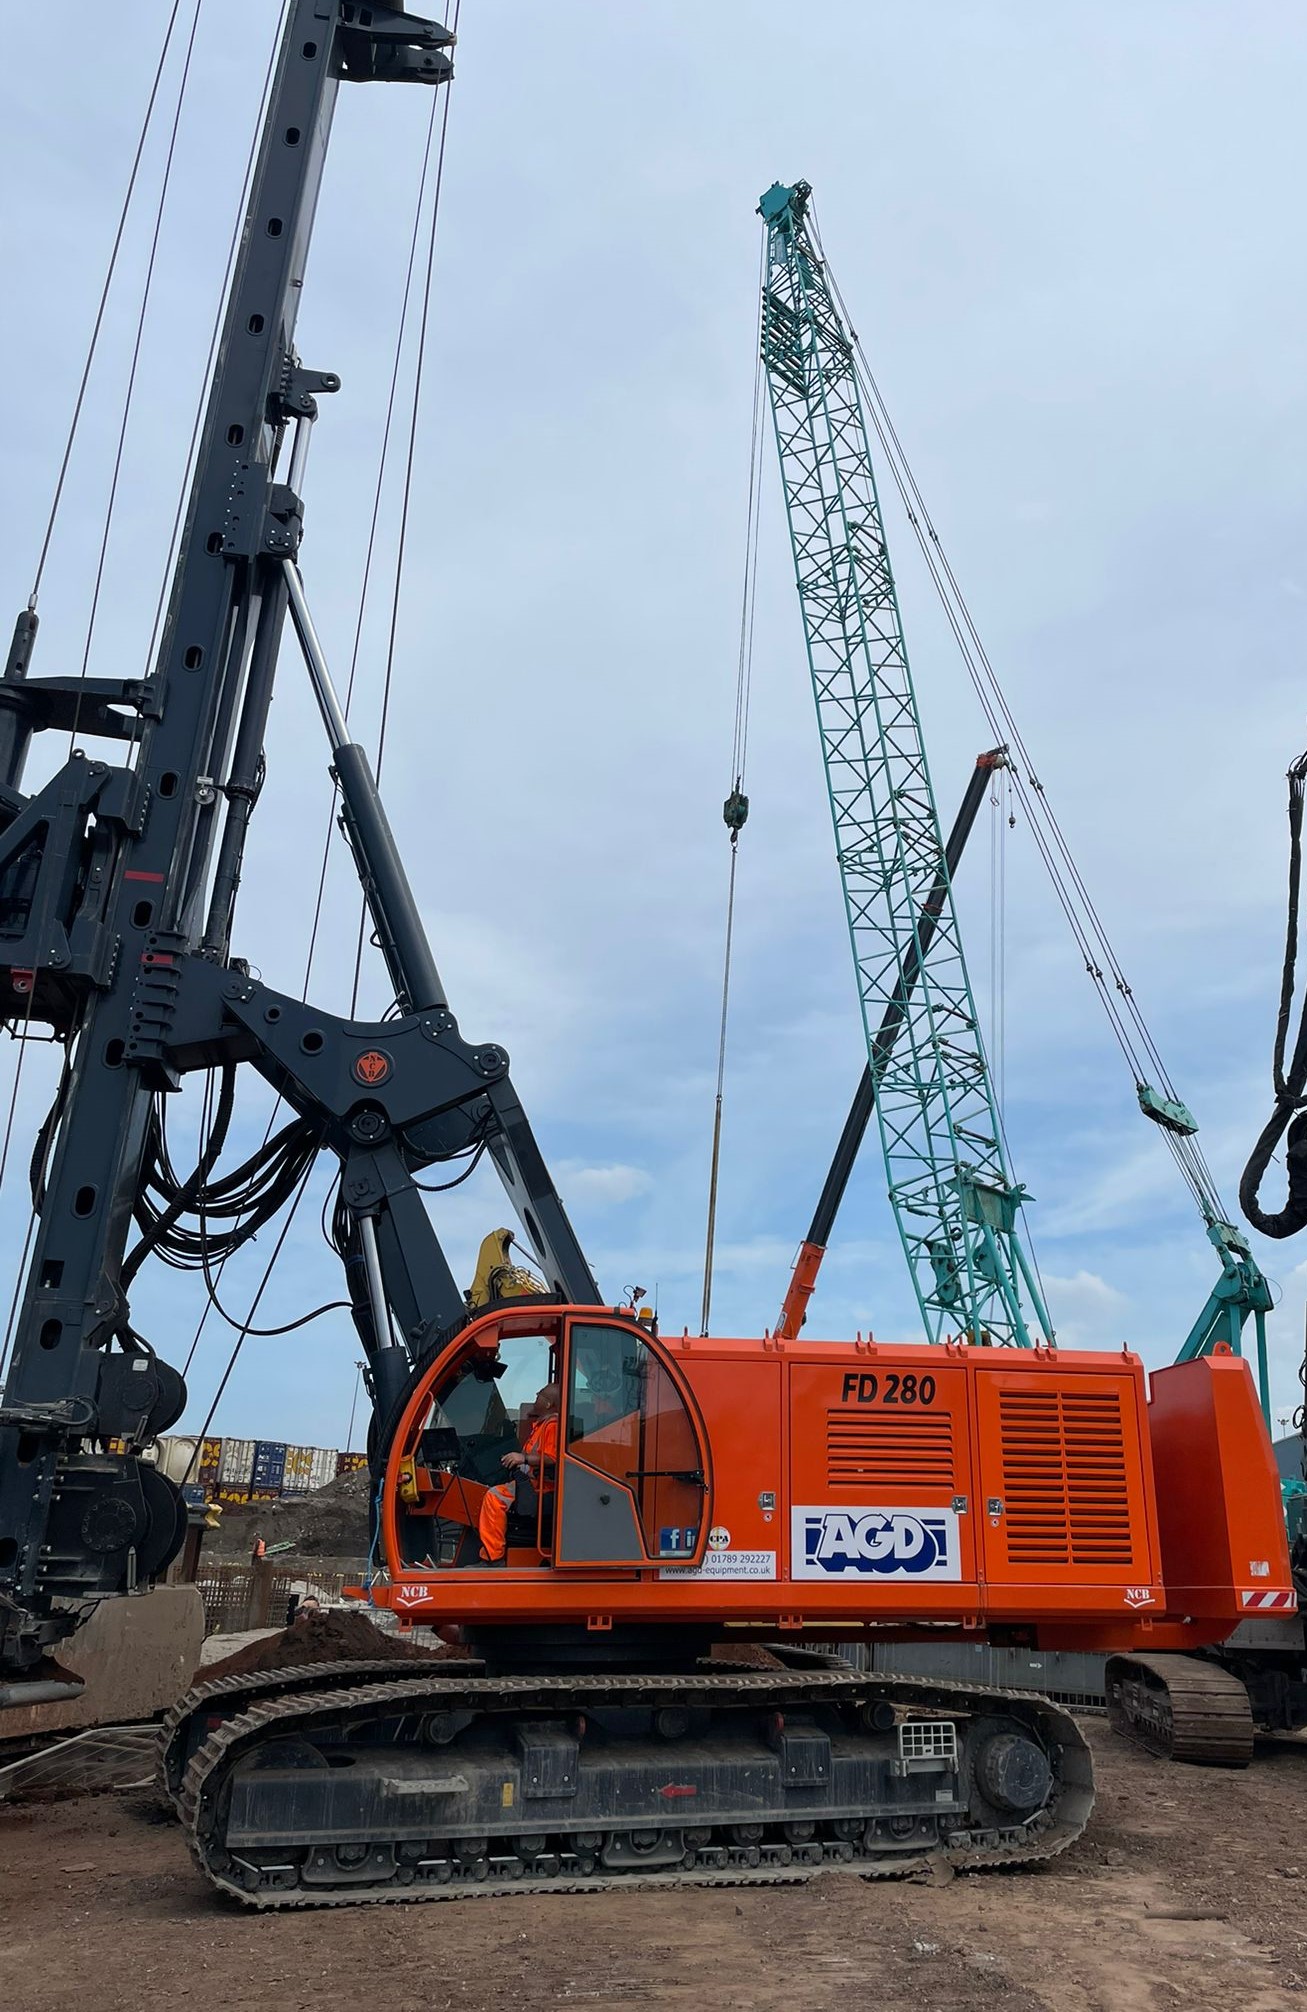 UK Suppliers of NCB FD280 Piling Rig Rental